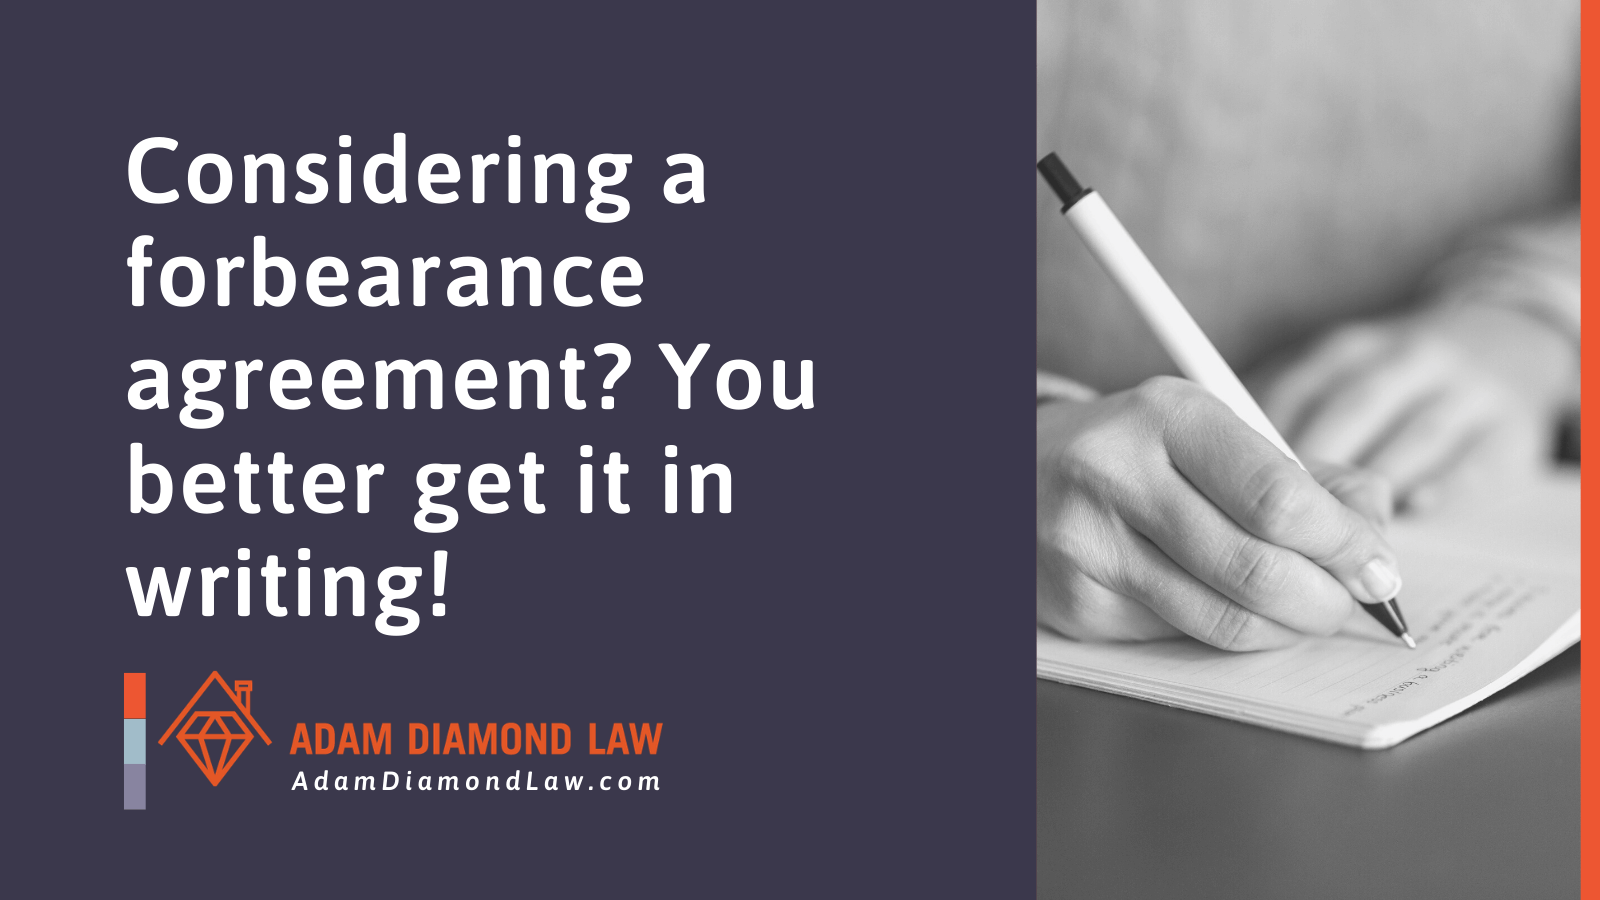 Considering a forbearance agreement? You better get it in writing! - Adam Diamond Law | McHenry, IL Residential Real Estate Lawyer